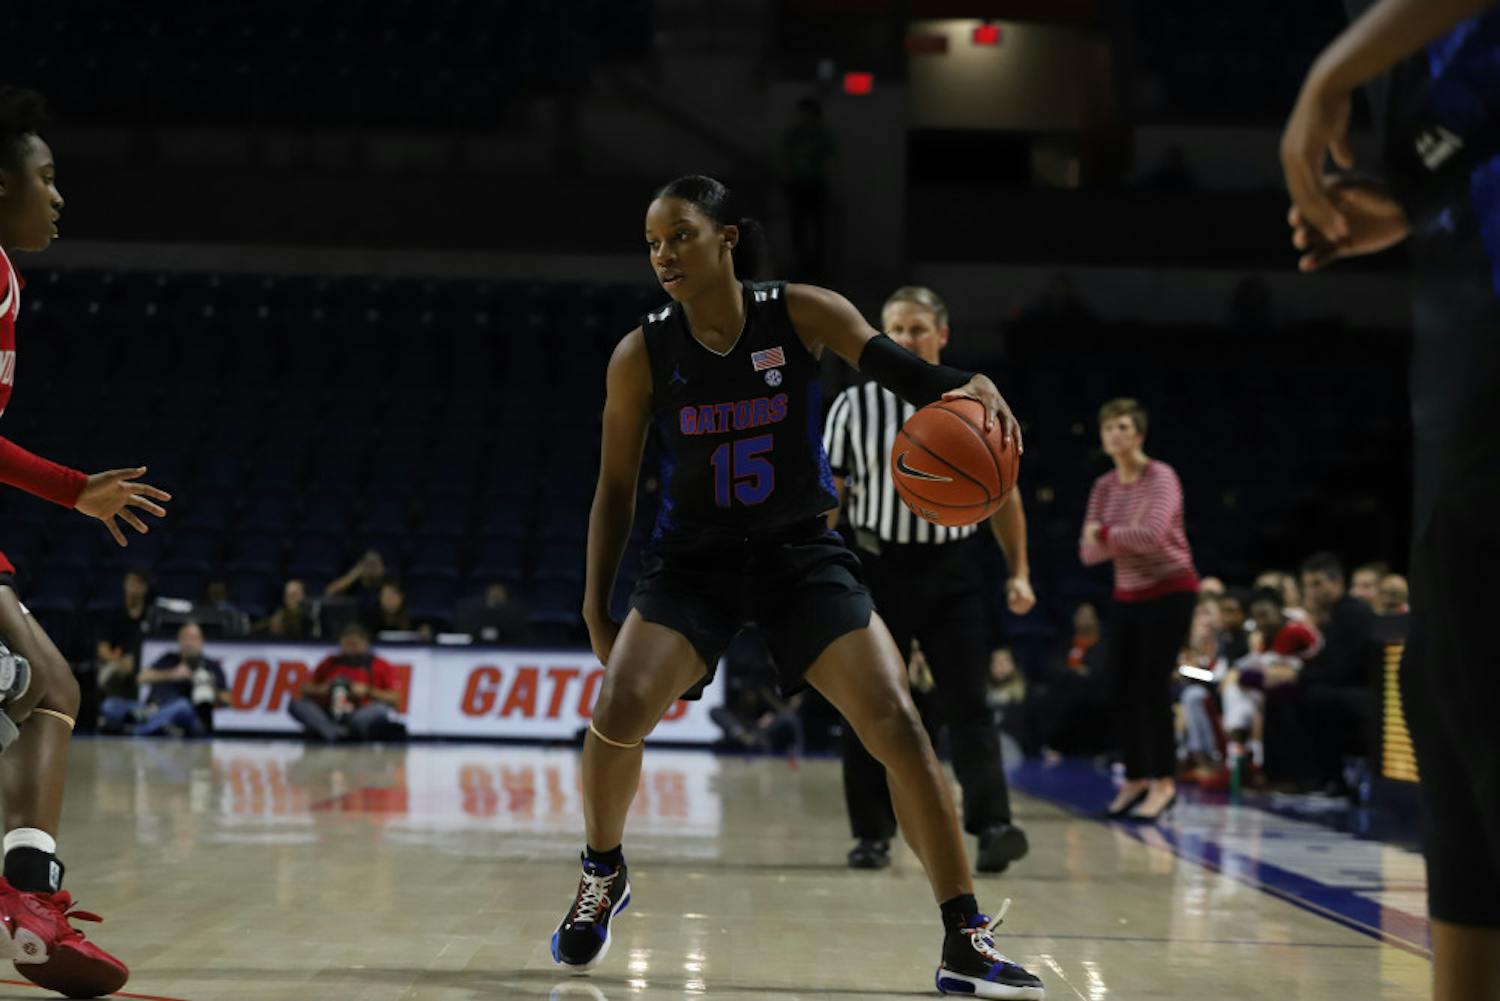 Sophomore guard Nina Rickards put up 18 points and sot 4-6 from deep in the Gators loss to the Seminoles.